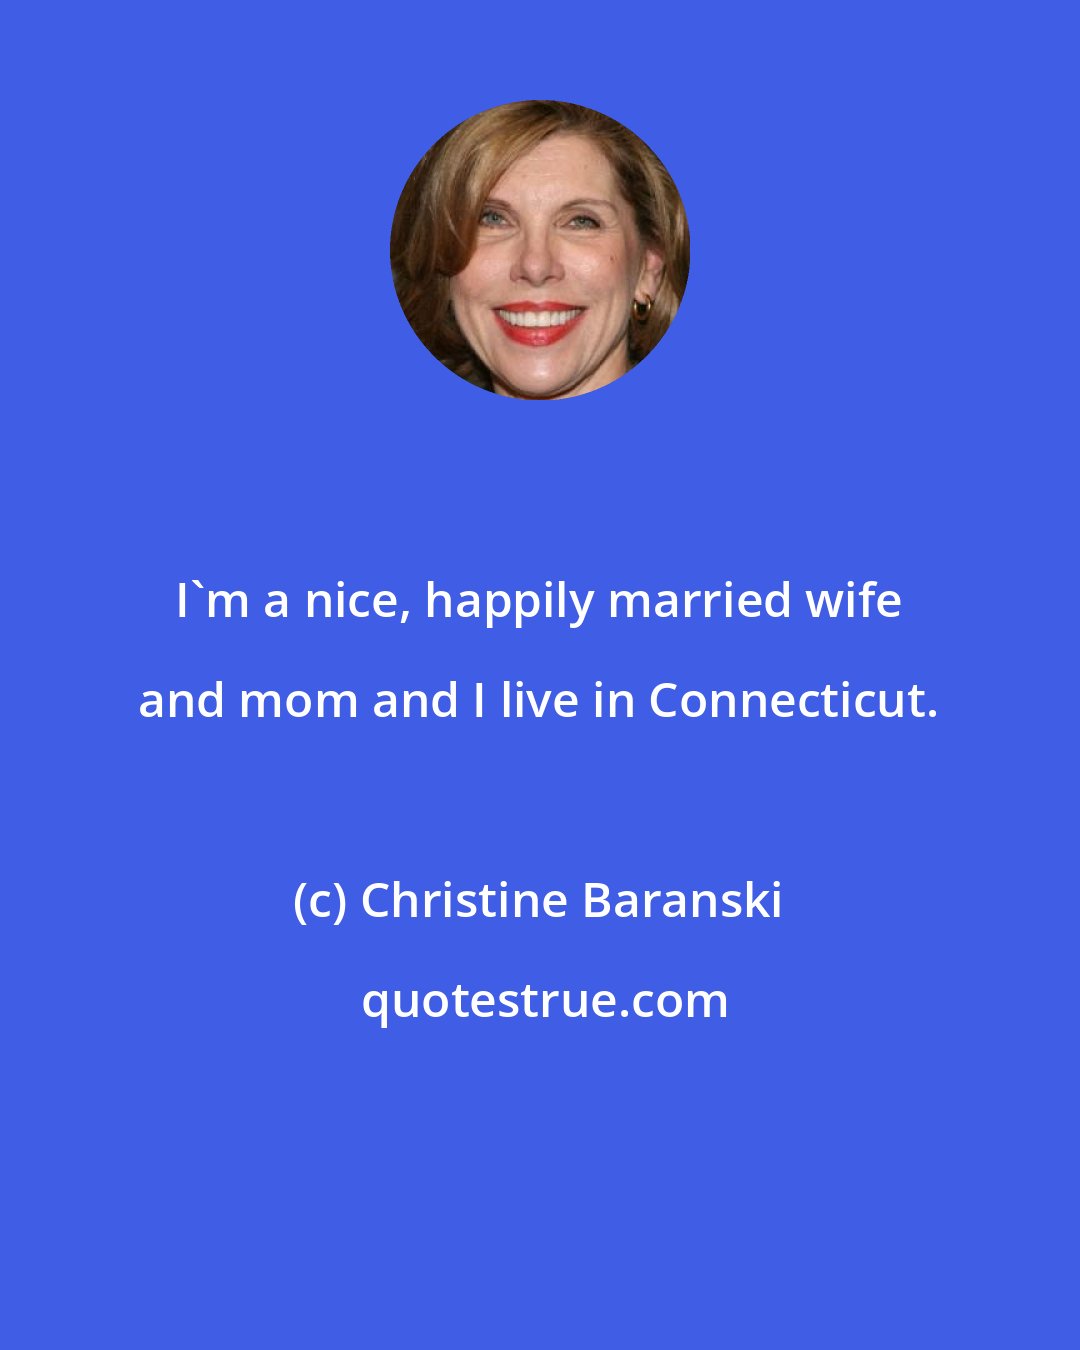 Christine Baranski: I'm a nice, happily married wife and mom and I live in Connecticut.